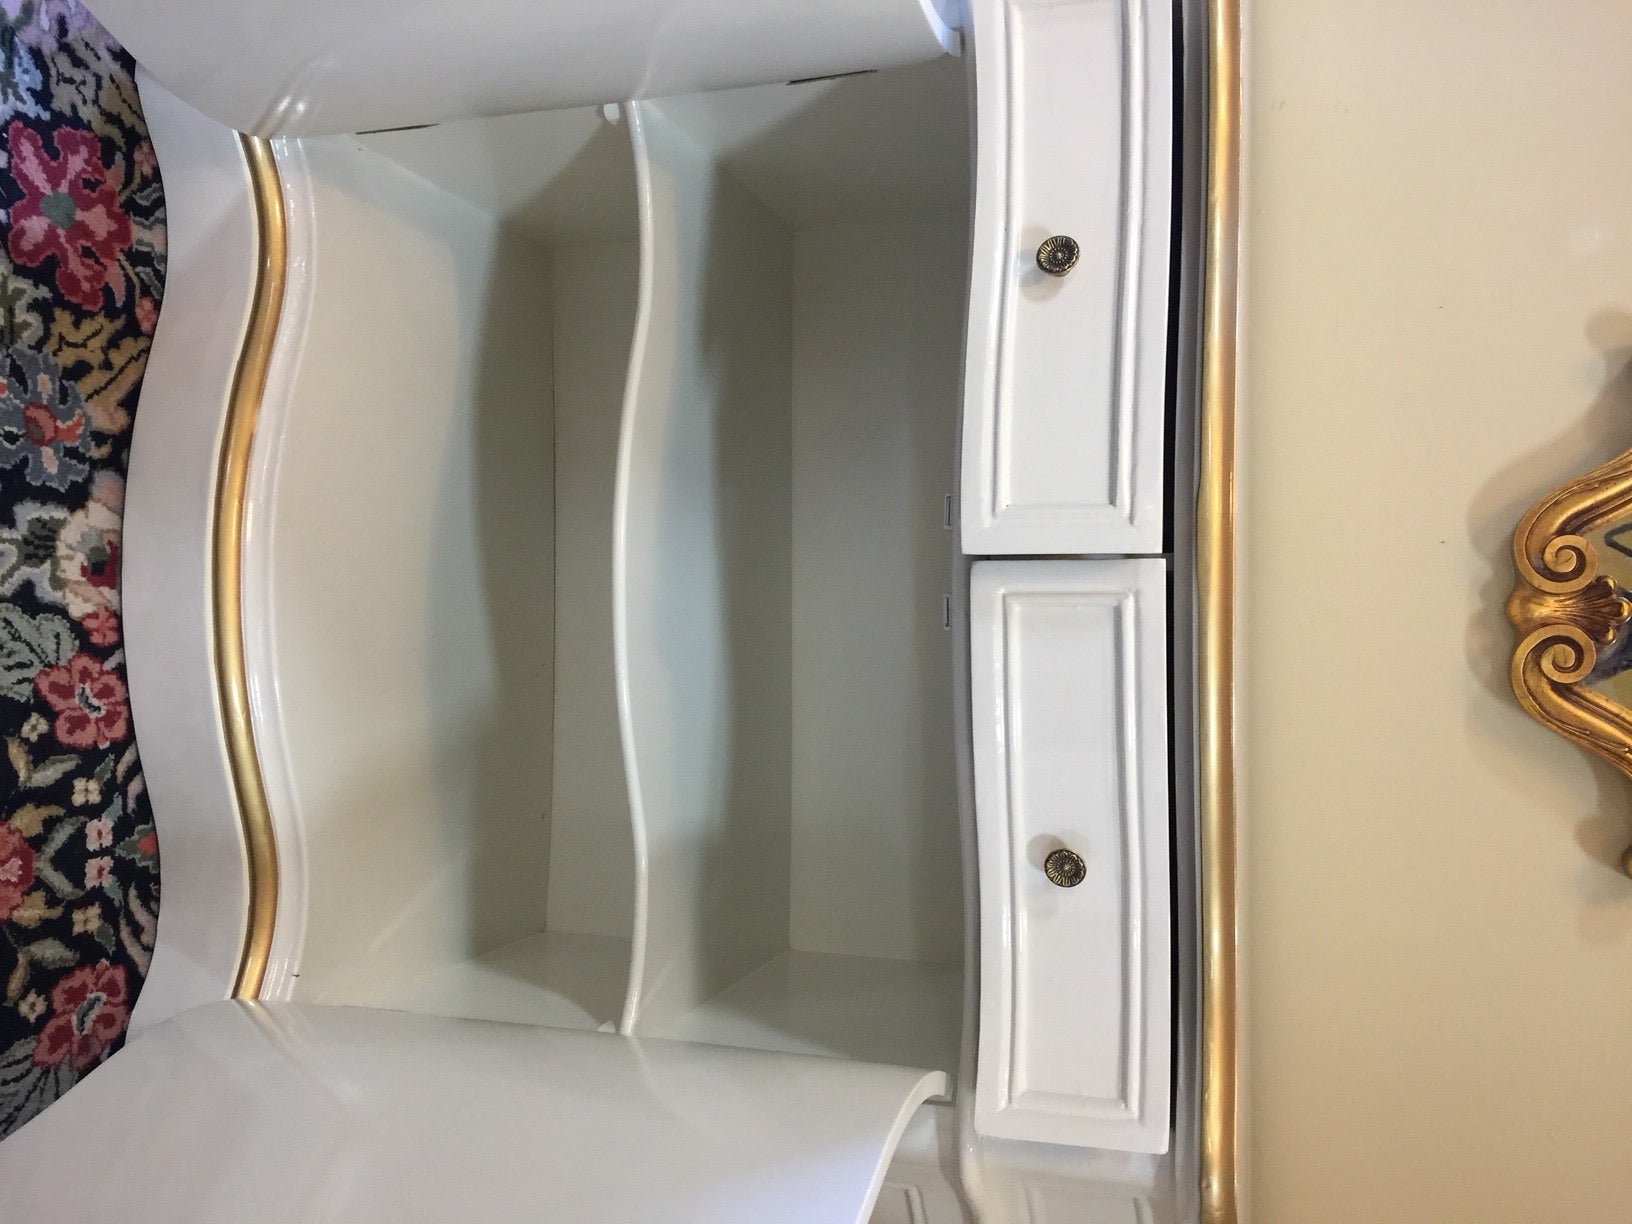 Late 20th Century Curvy Lacquered Sideboard in Cream and Gold